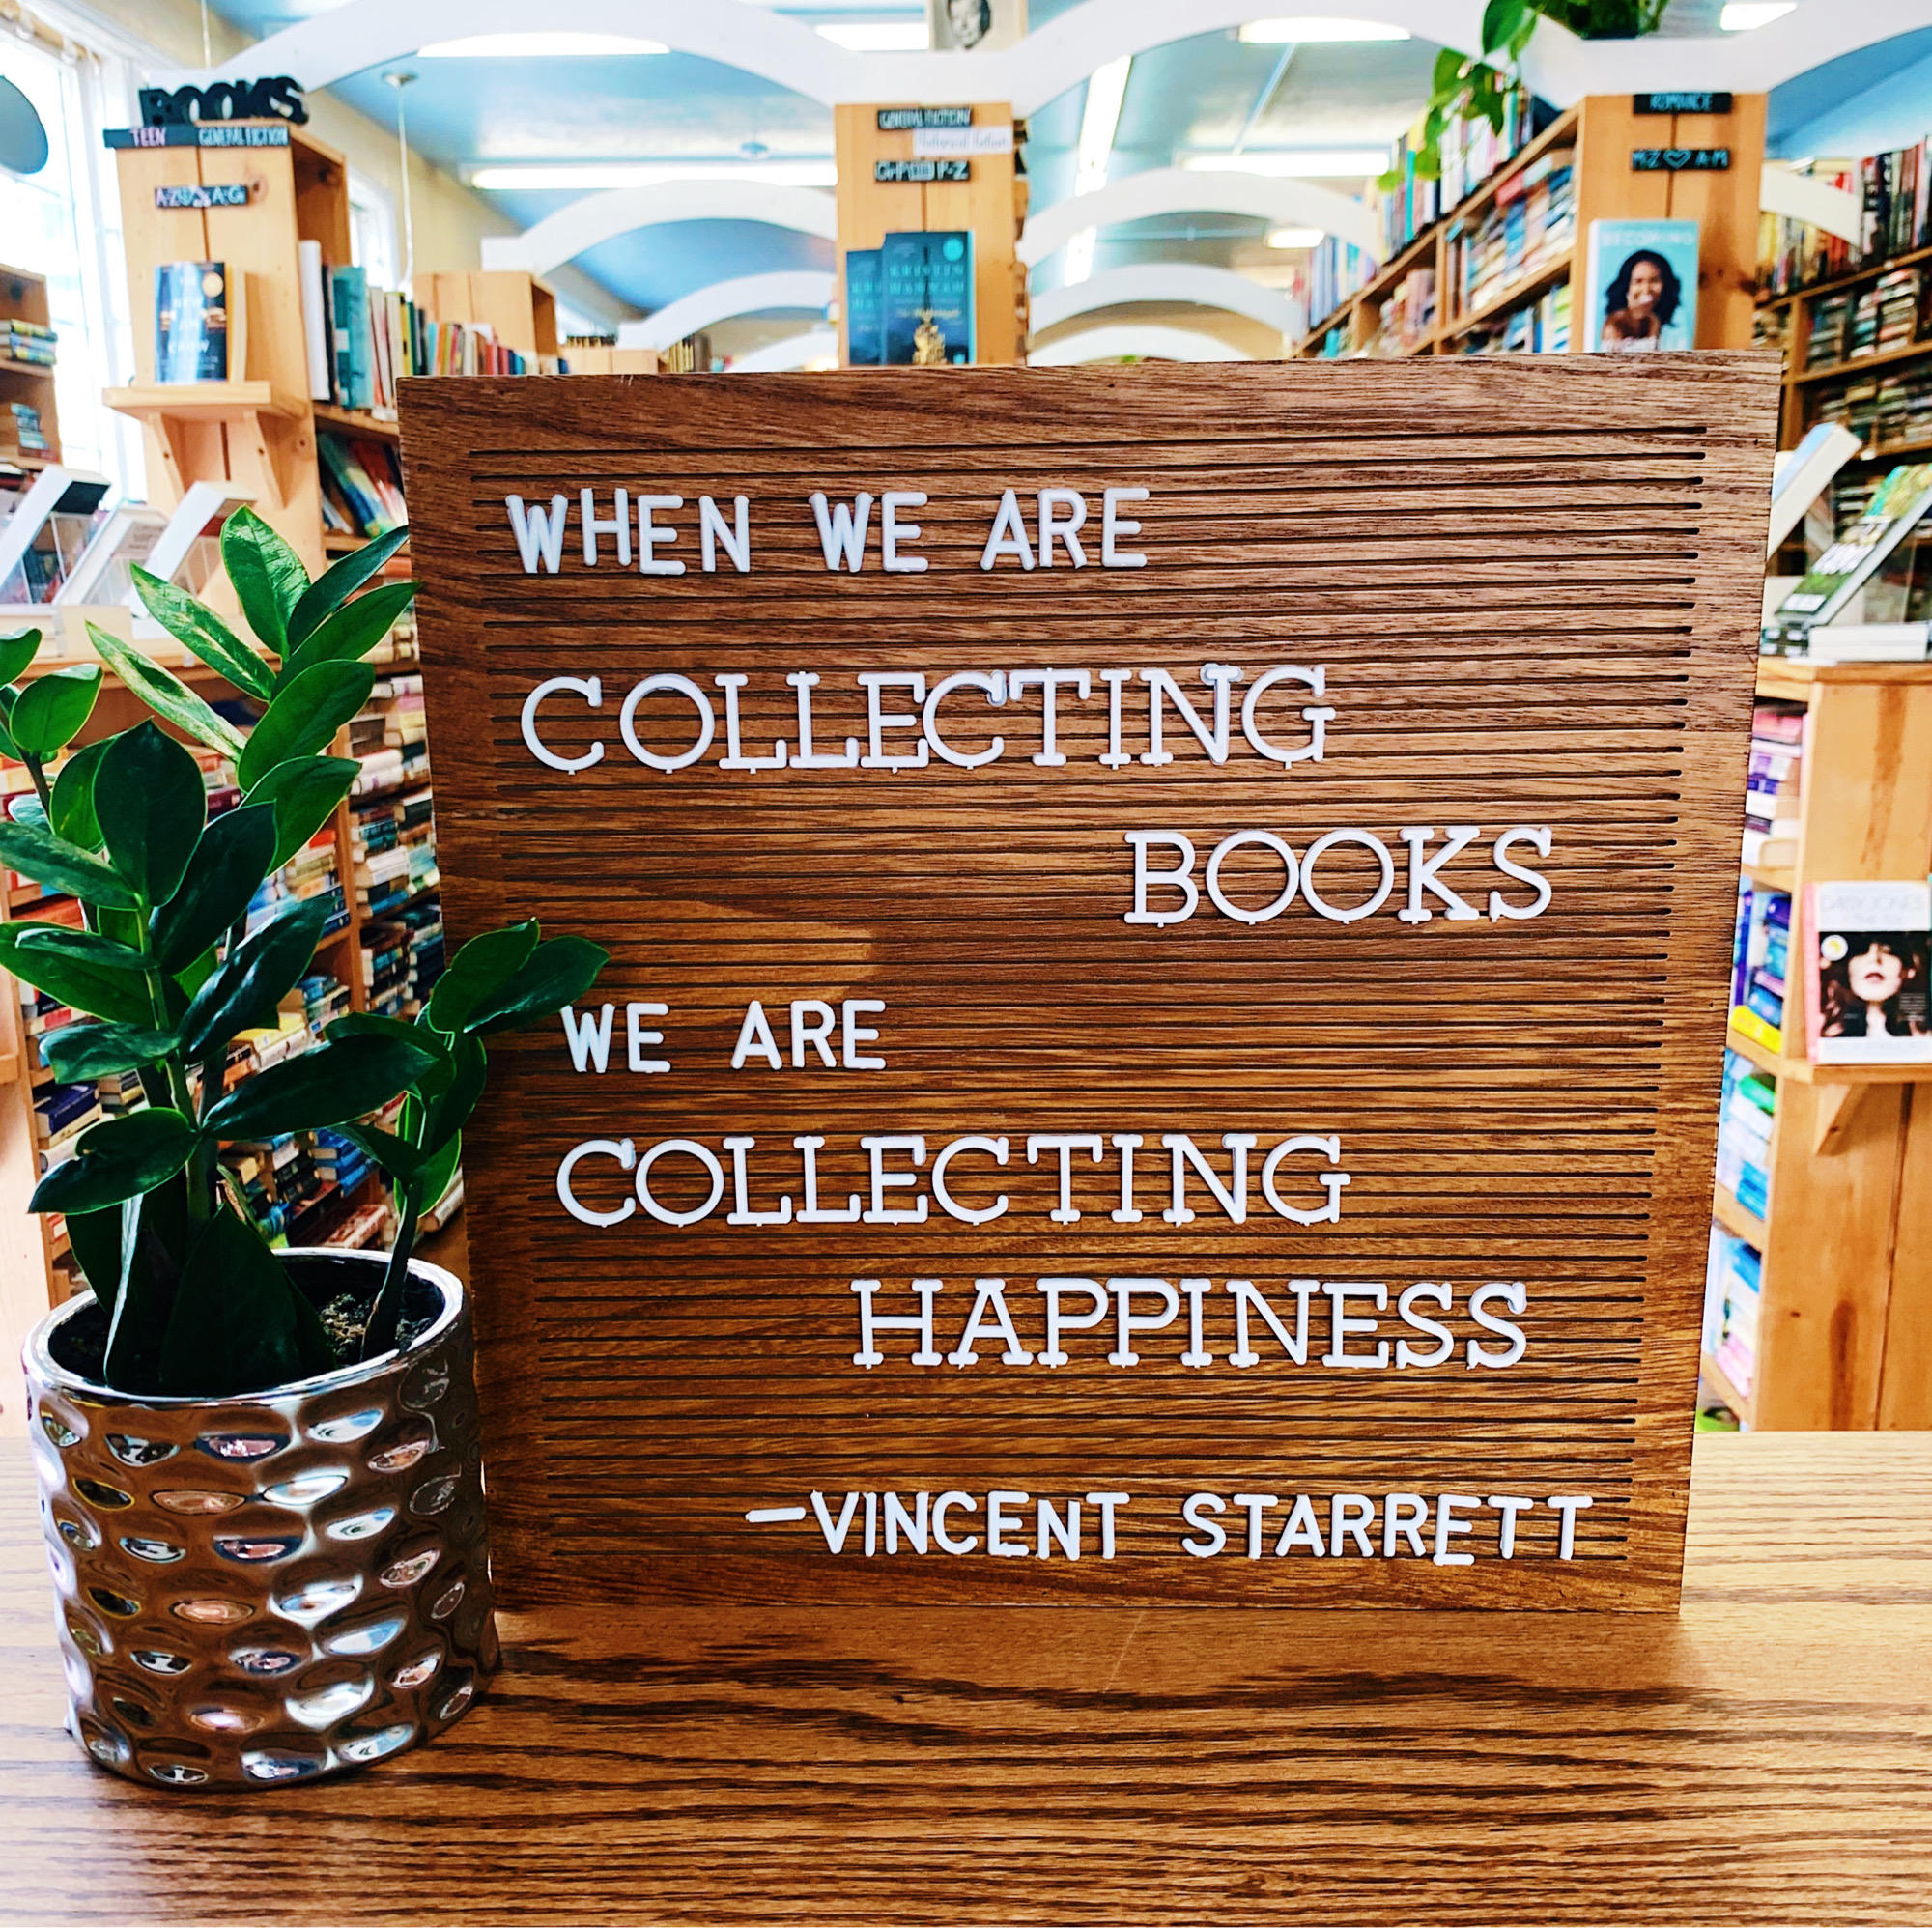 When we are collecting books we are collecting happiness. - Vincent Starrett